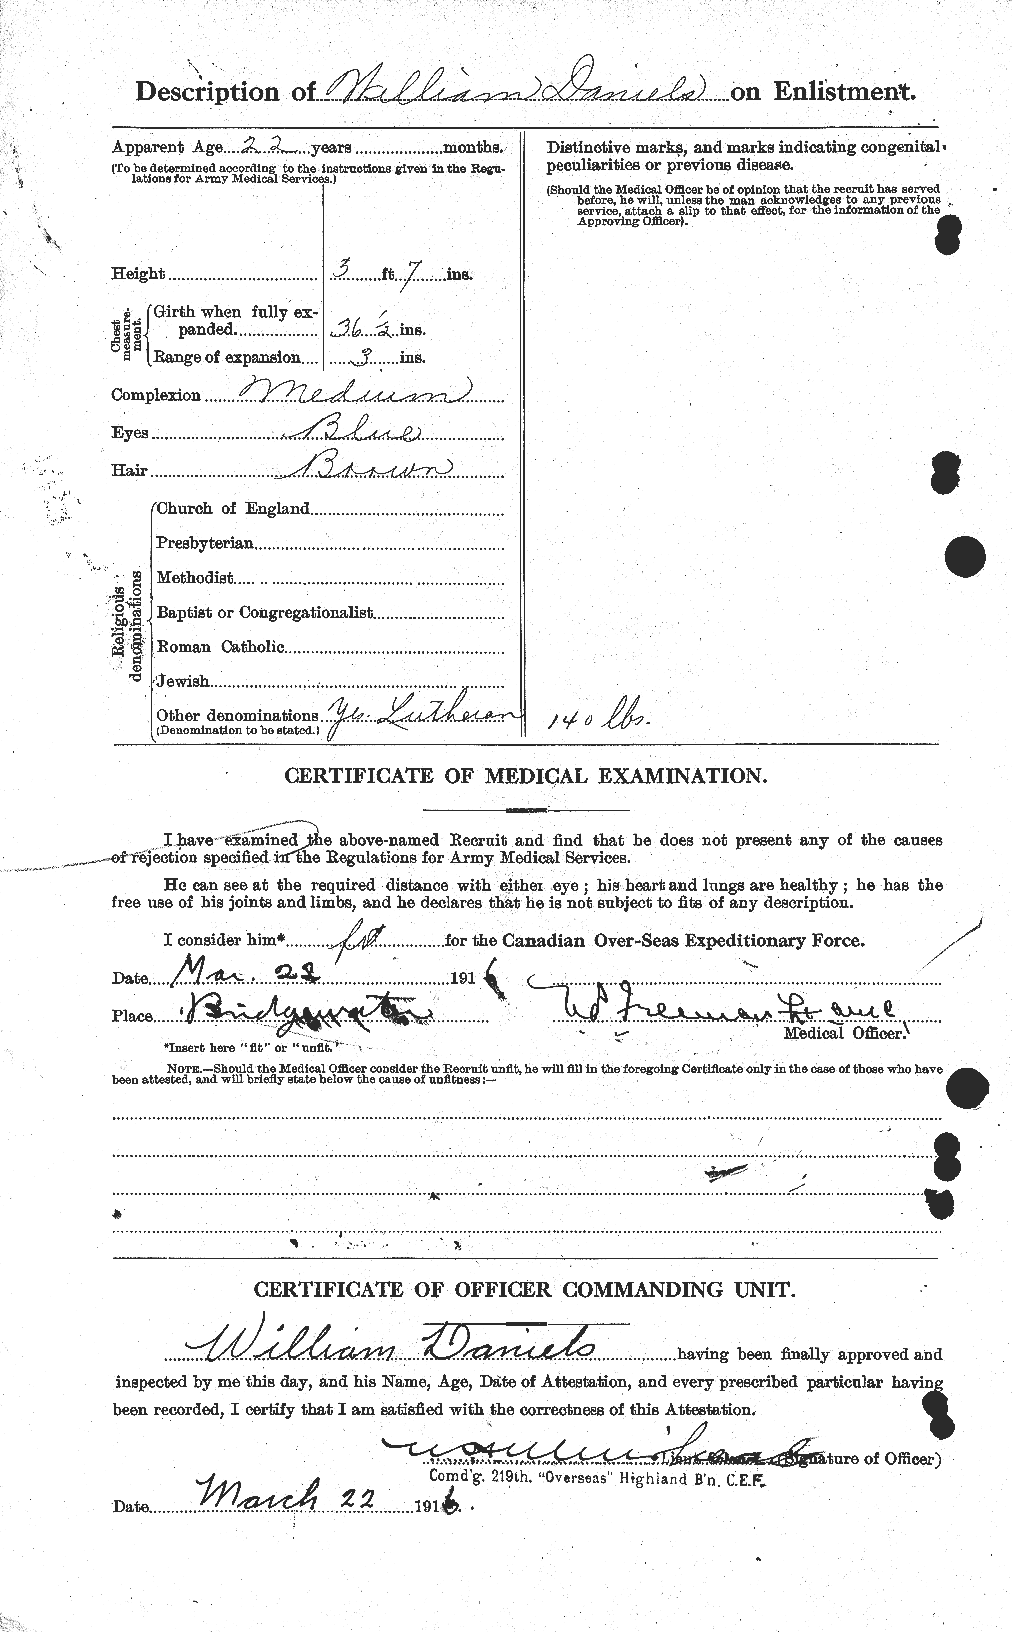 Personnel Records of the First World War - CEF 279688b